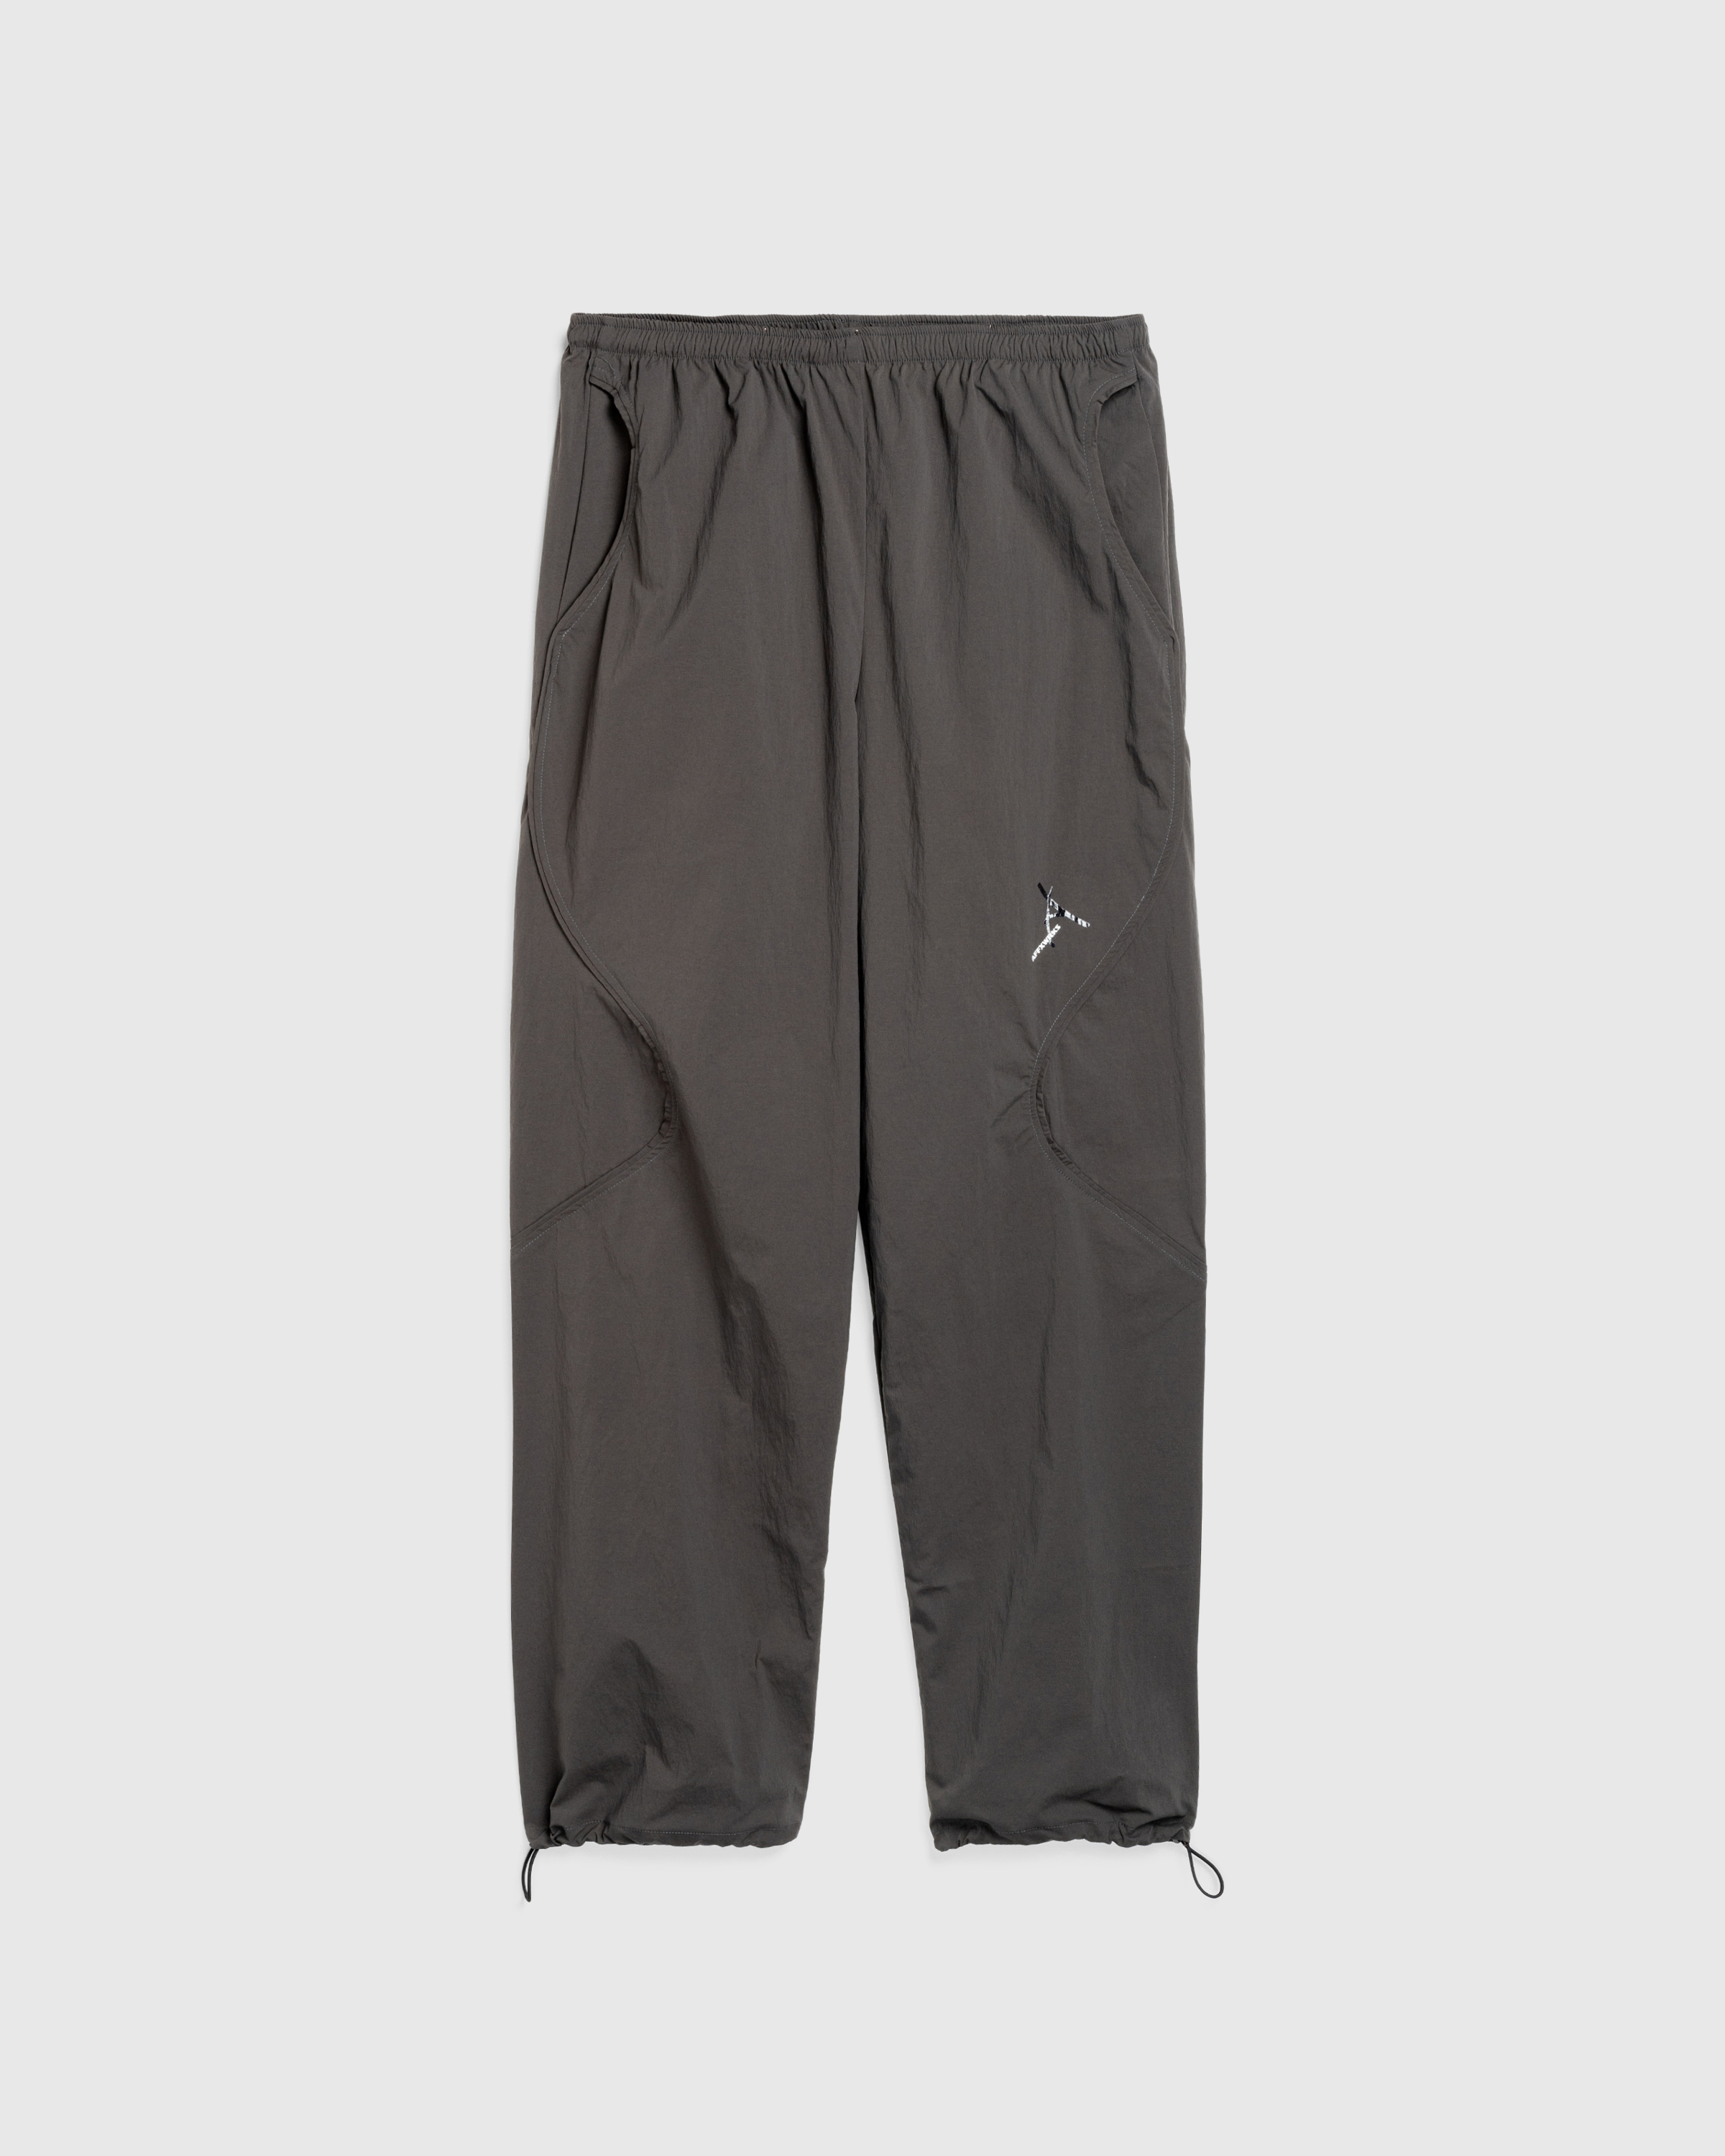 AFFXWRKS – Transit Pant Shale Brown - Trousers - Brown - Image 1